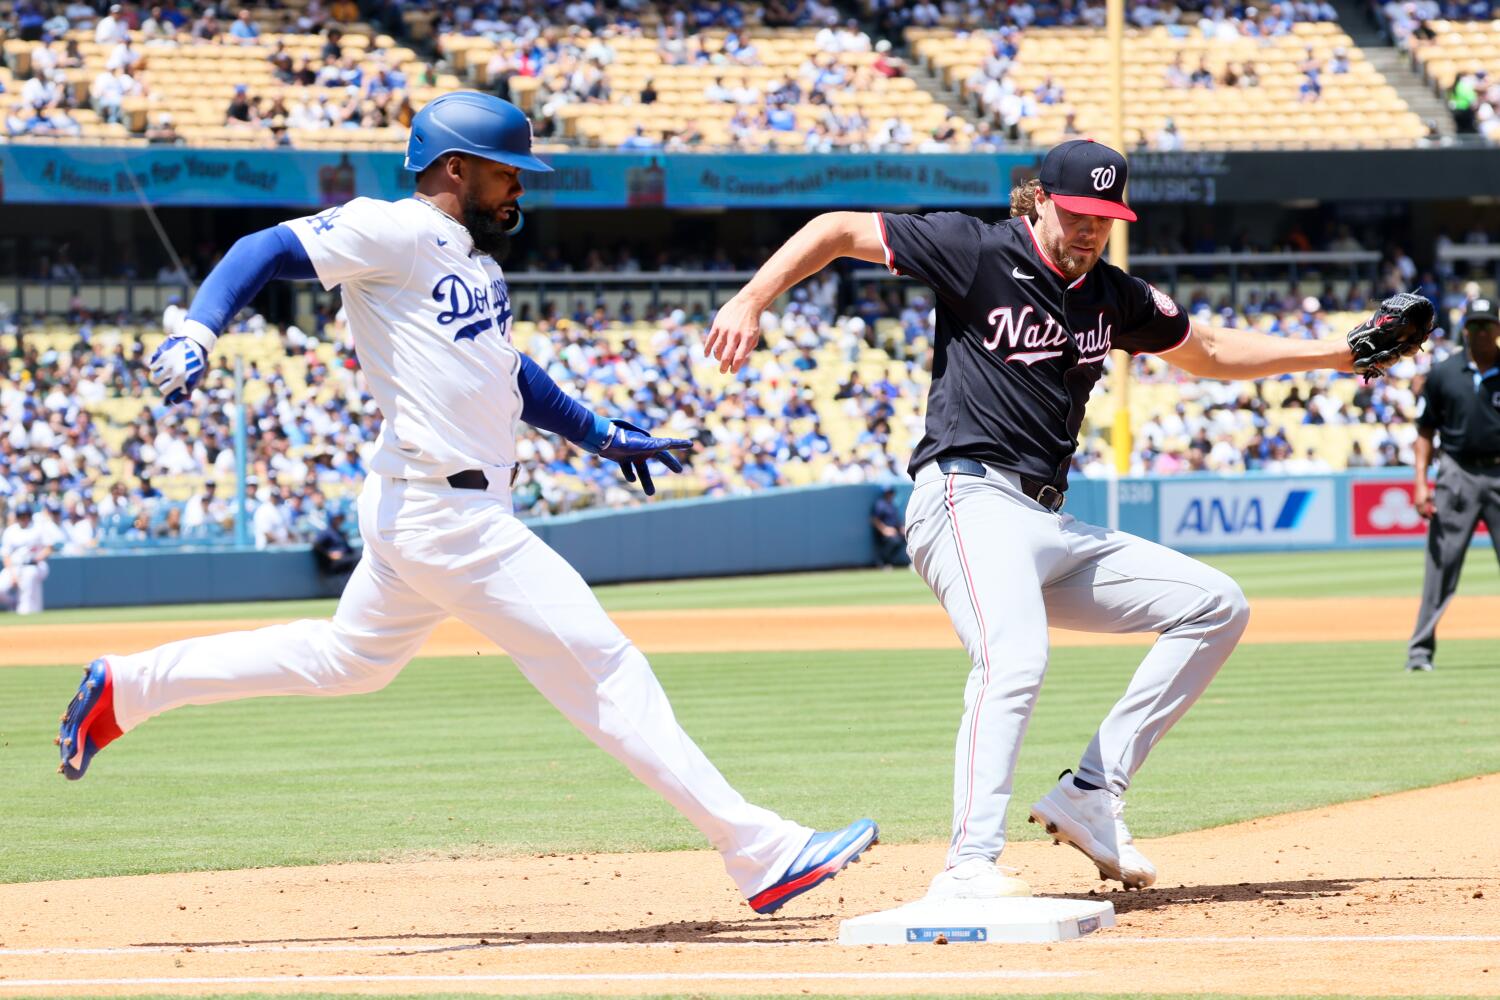 dodgers-shut-out-by-nationals,-drop-another-series-at-home-in-landon-knack’s-first-start